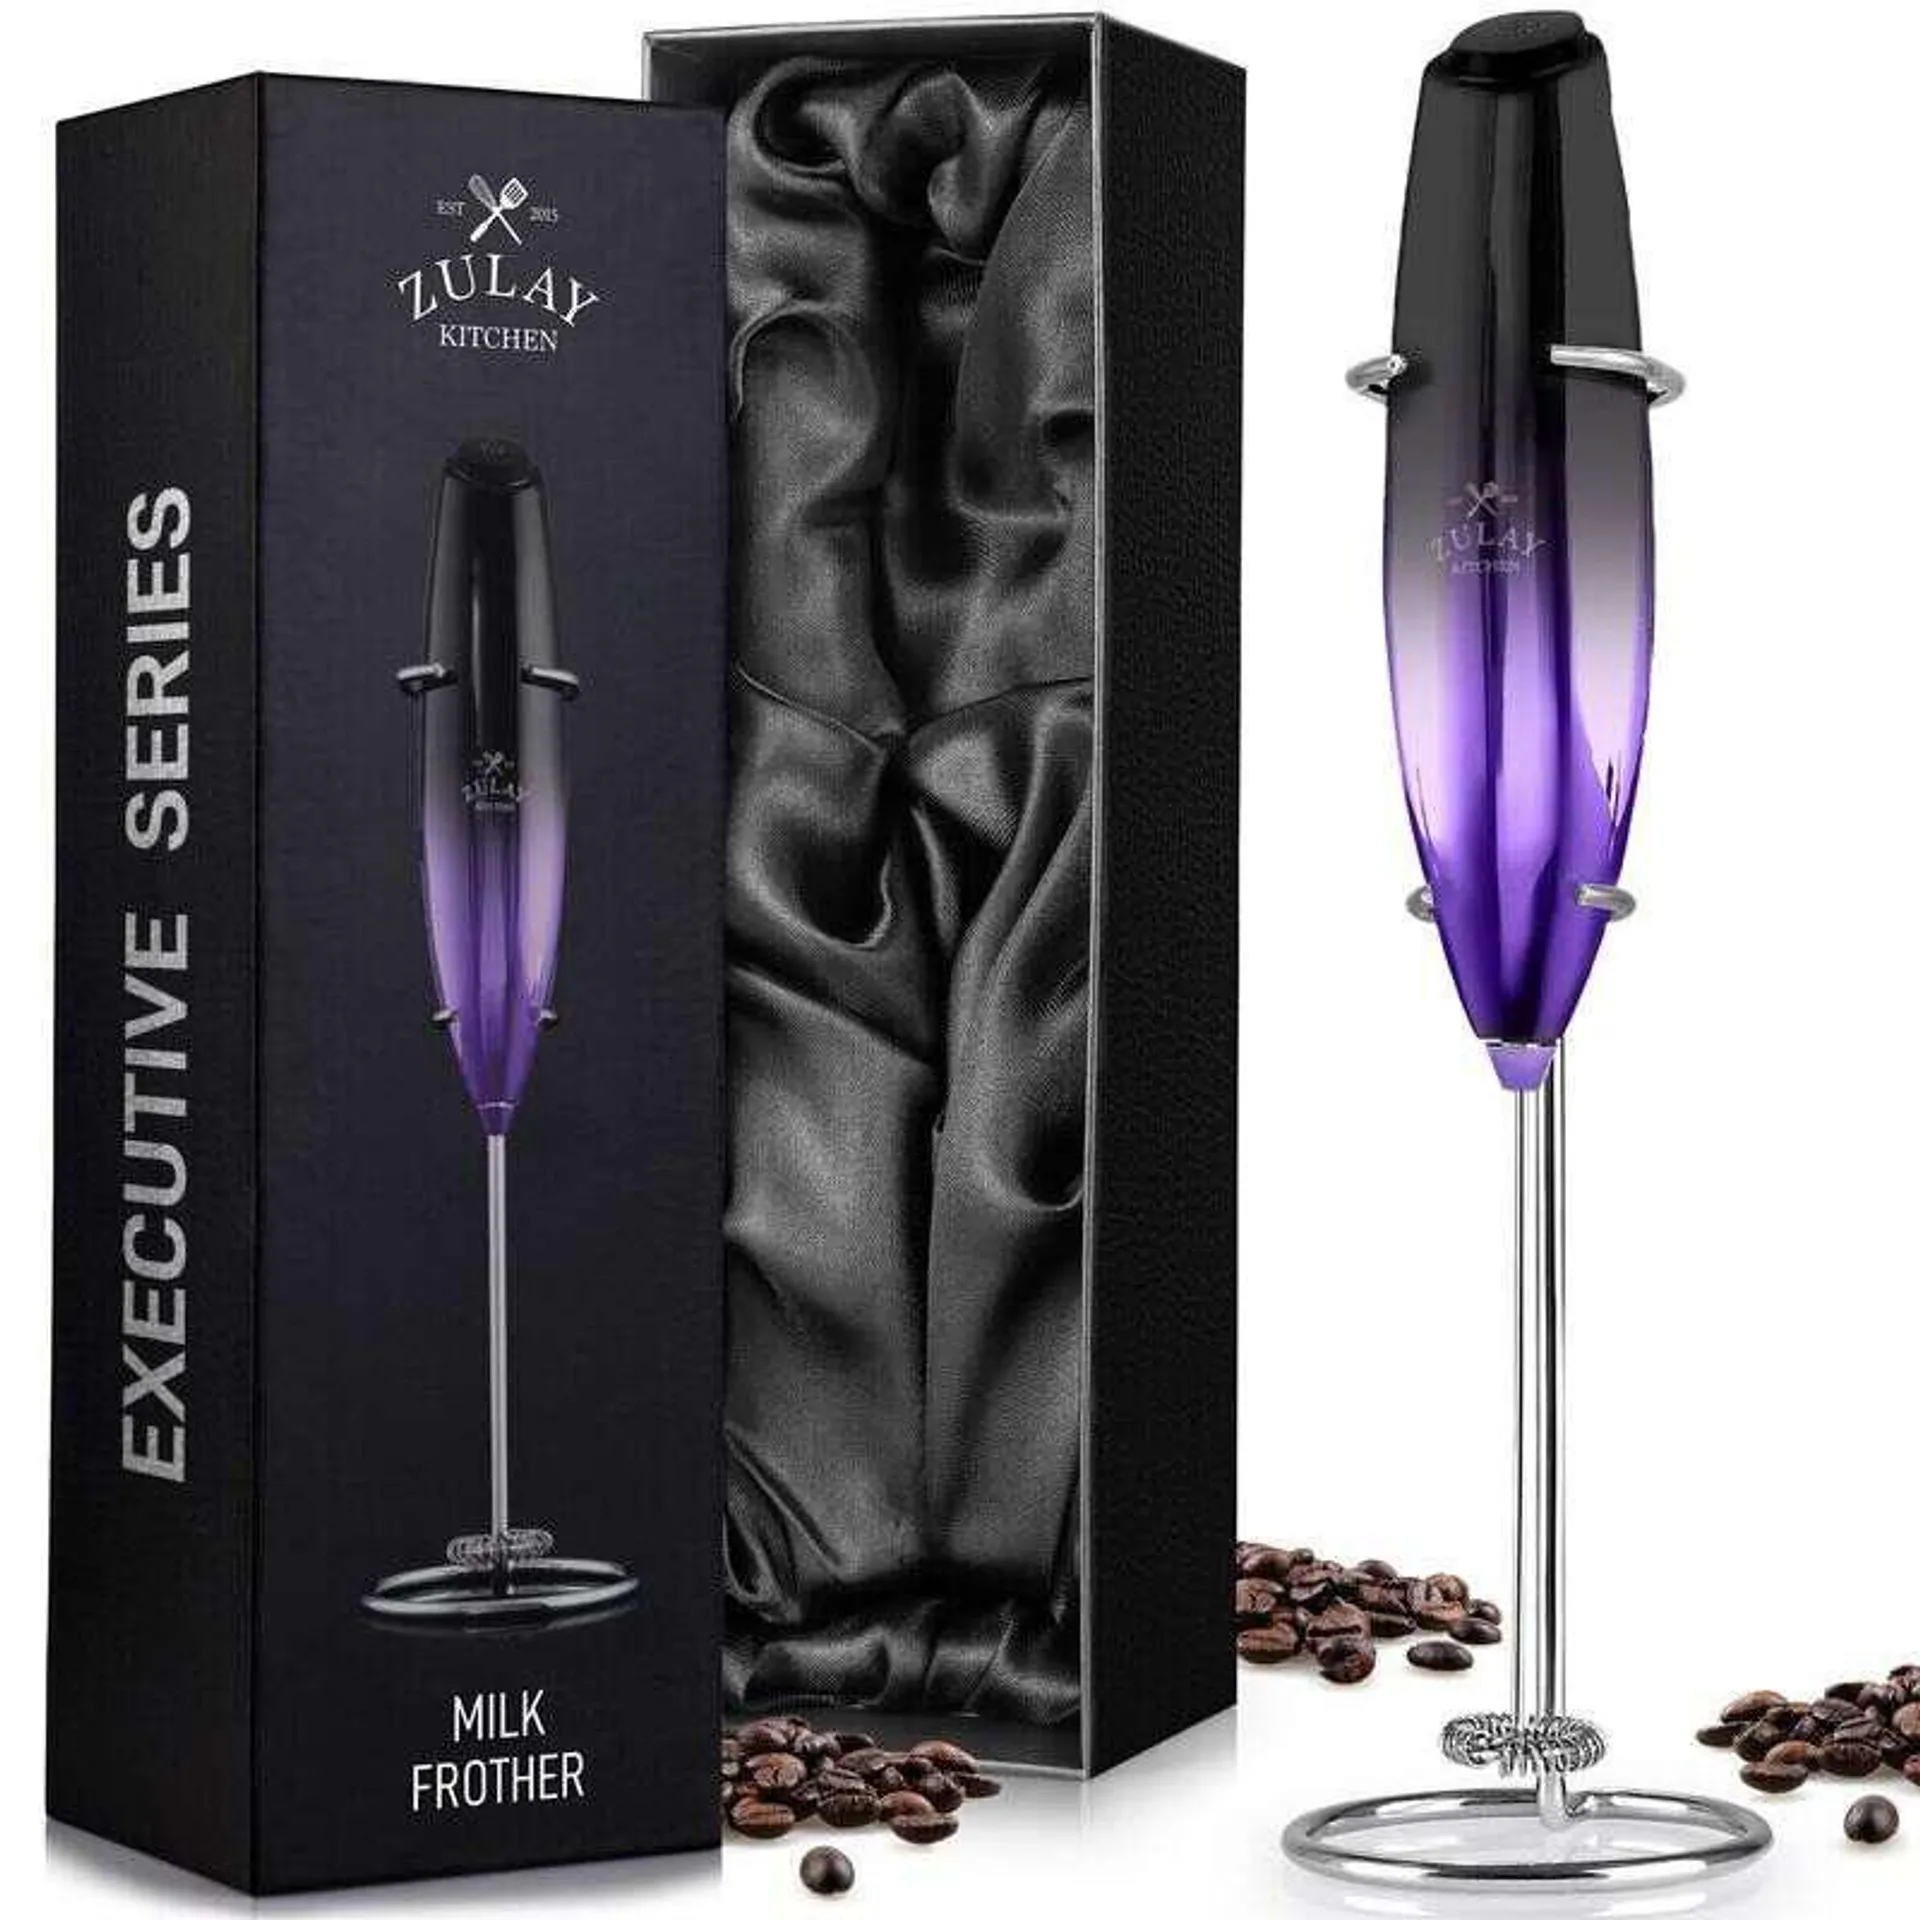 Executive Series Ultra Premium Gift Milk Frother